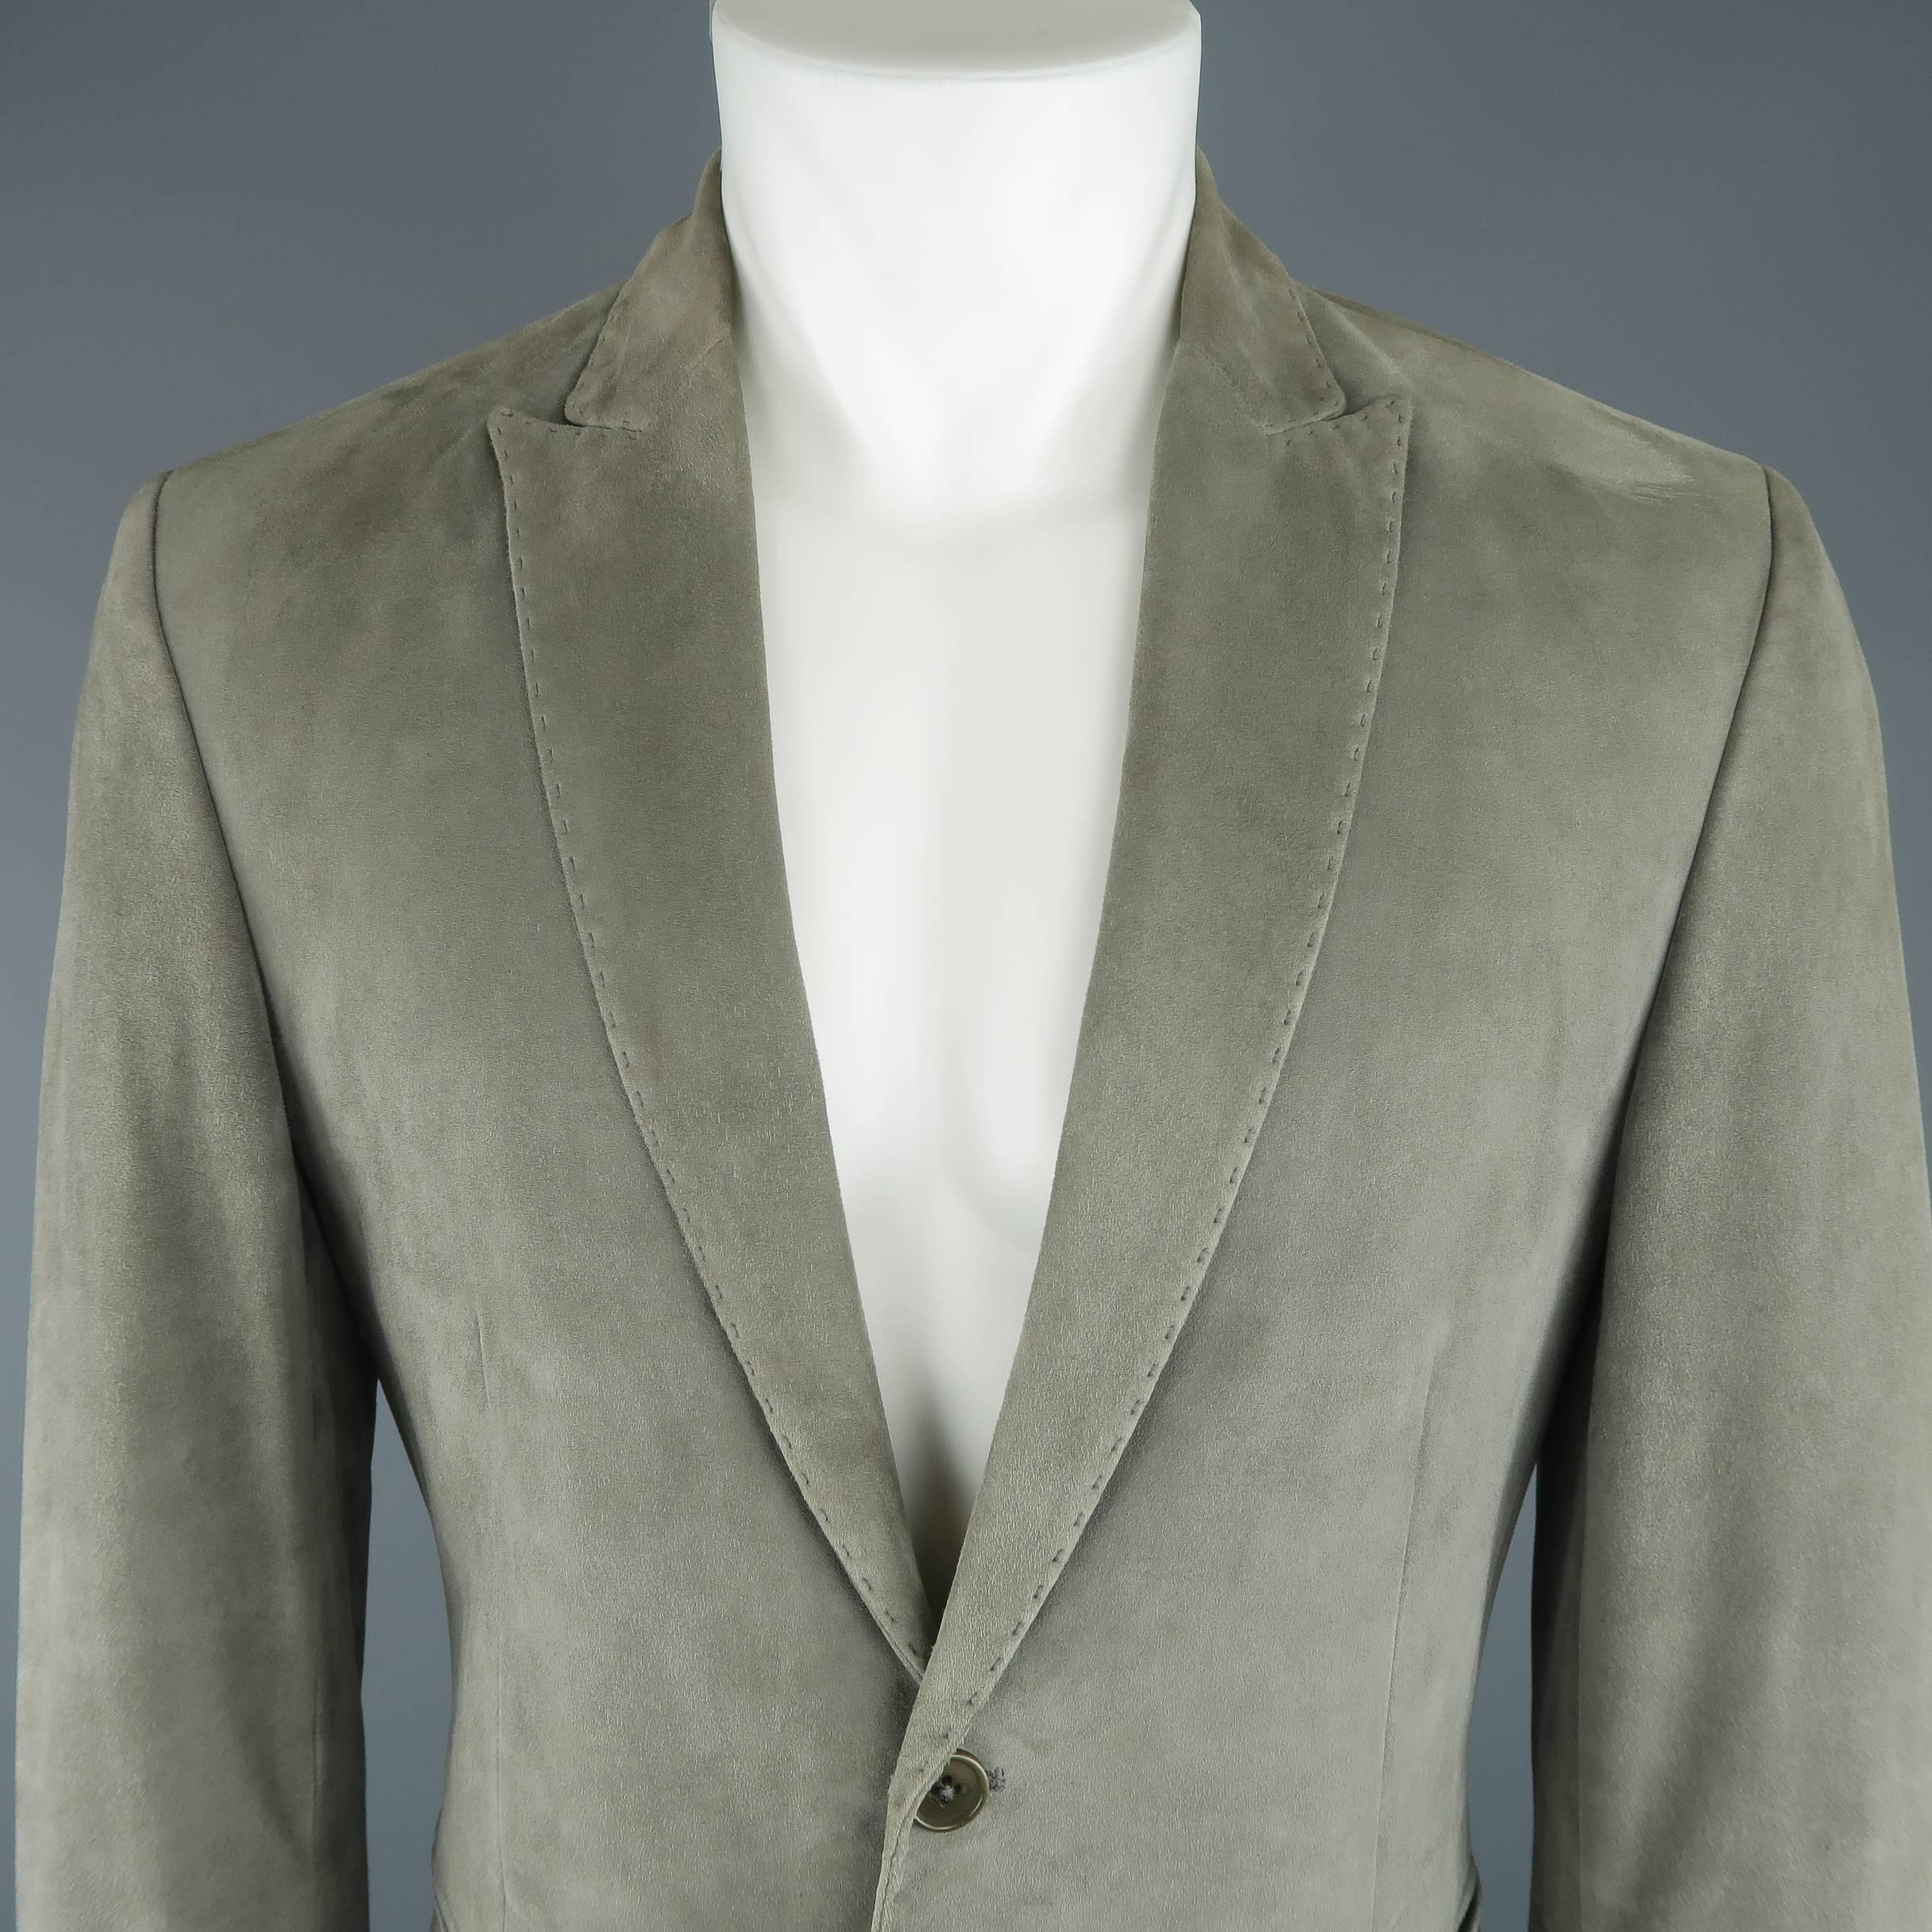 JOHN VARVATOS single breasted sport coat comes in light gray suede with a peak lapel, functional button cuffs, and two button front.
 
Good Pre-Owned Condition.
Marked: IT 48 S
 
Measurements:
 
Shoulder: 17 in.
Chest: 40 in.
Sleeve: 24 in.
Length: